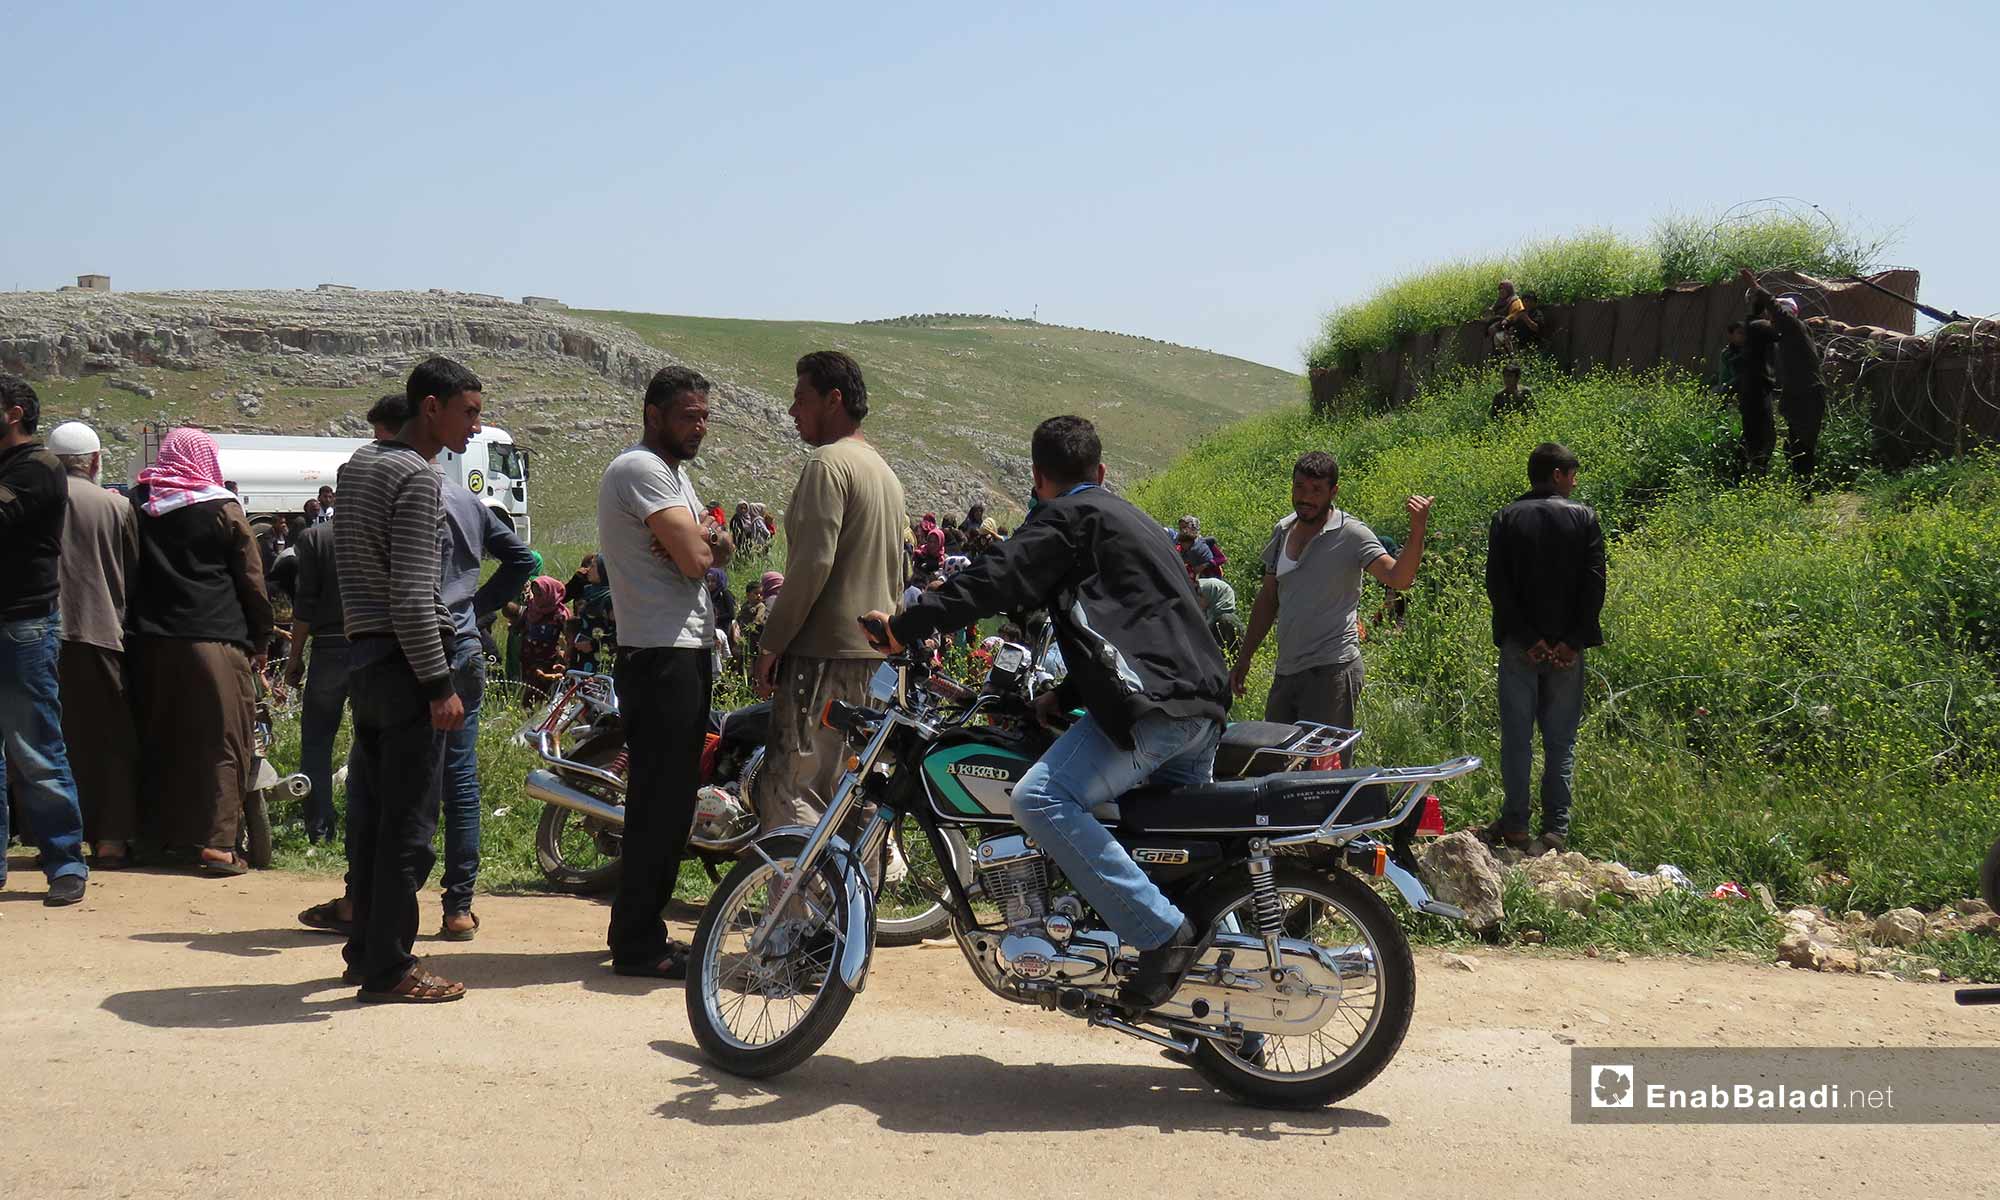 Civilians displaced to the vicinity of the Turkish observation point in Shair al-Maghar, western Hama, fleeing the shelling – April 29, 2019 (Enab Baladi)

